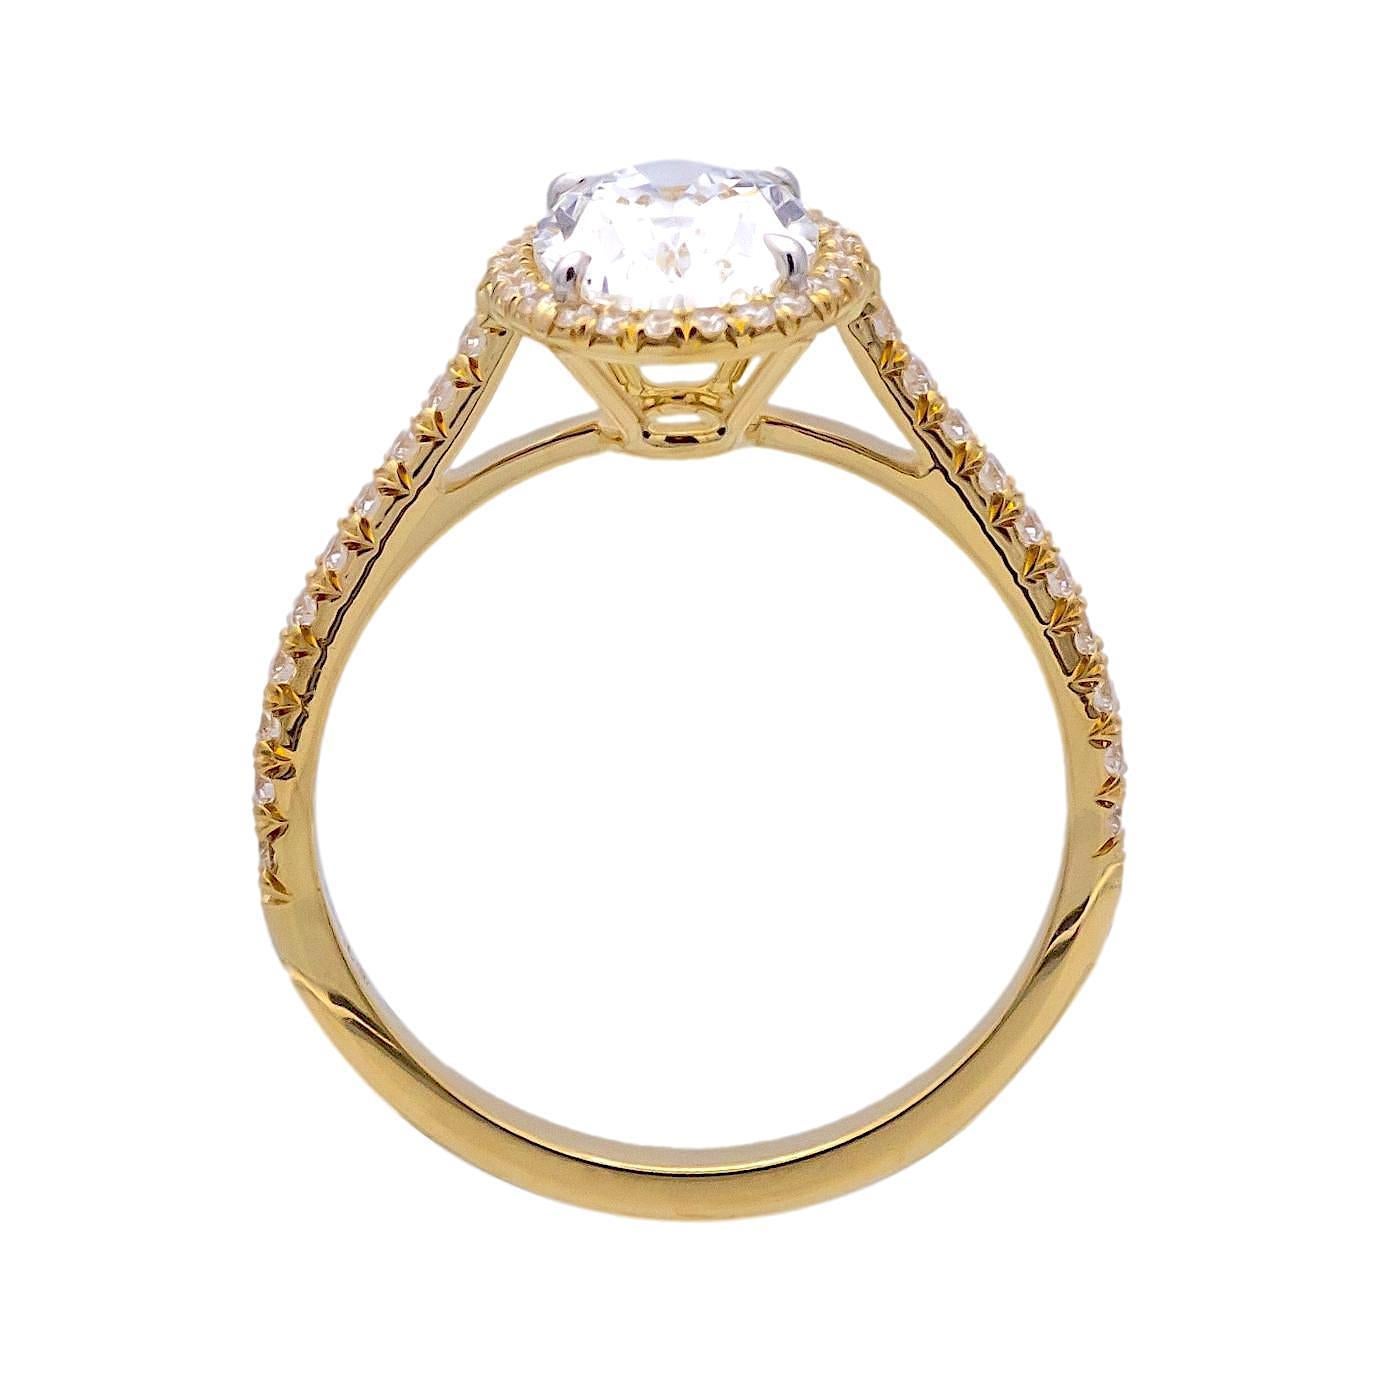 Women's Tiffany & Co. 18K Yellow Gold Oval Diamond Soleste Engagement Ring 2.02ctTW FVS1